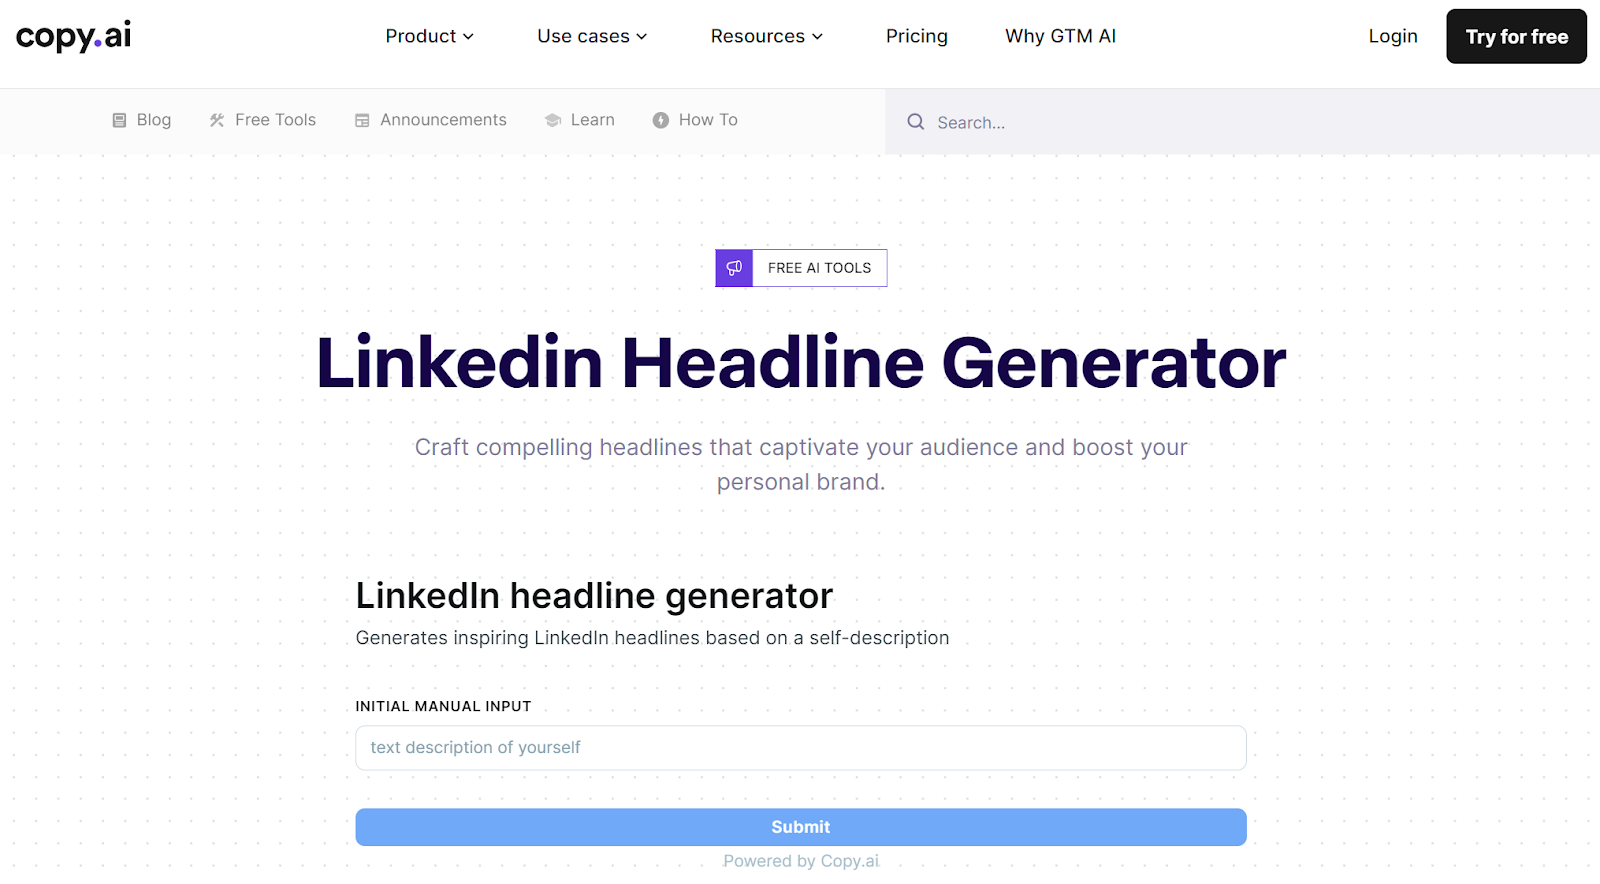 Generate LinkedIn headlines and summaries with Copy.ai